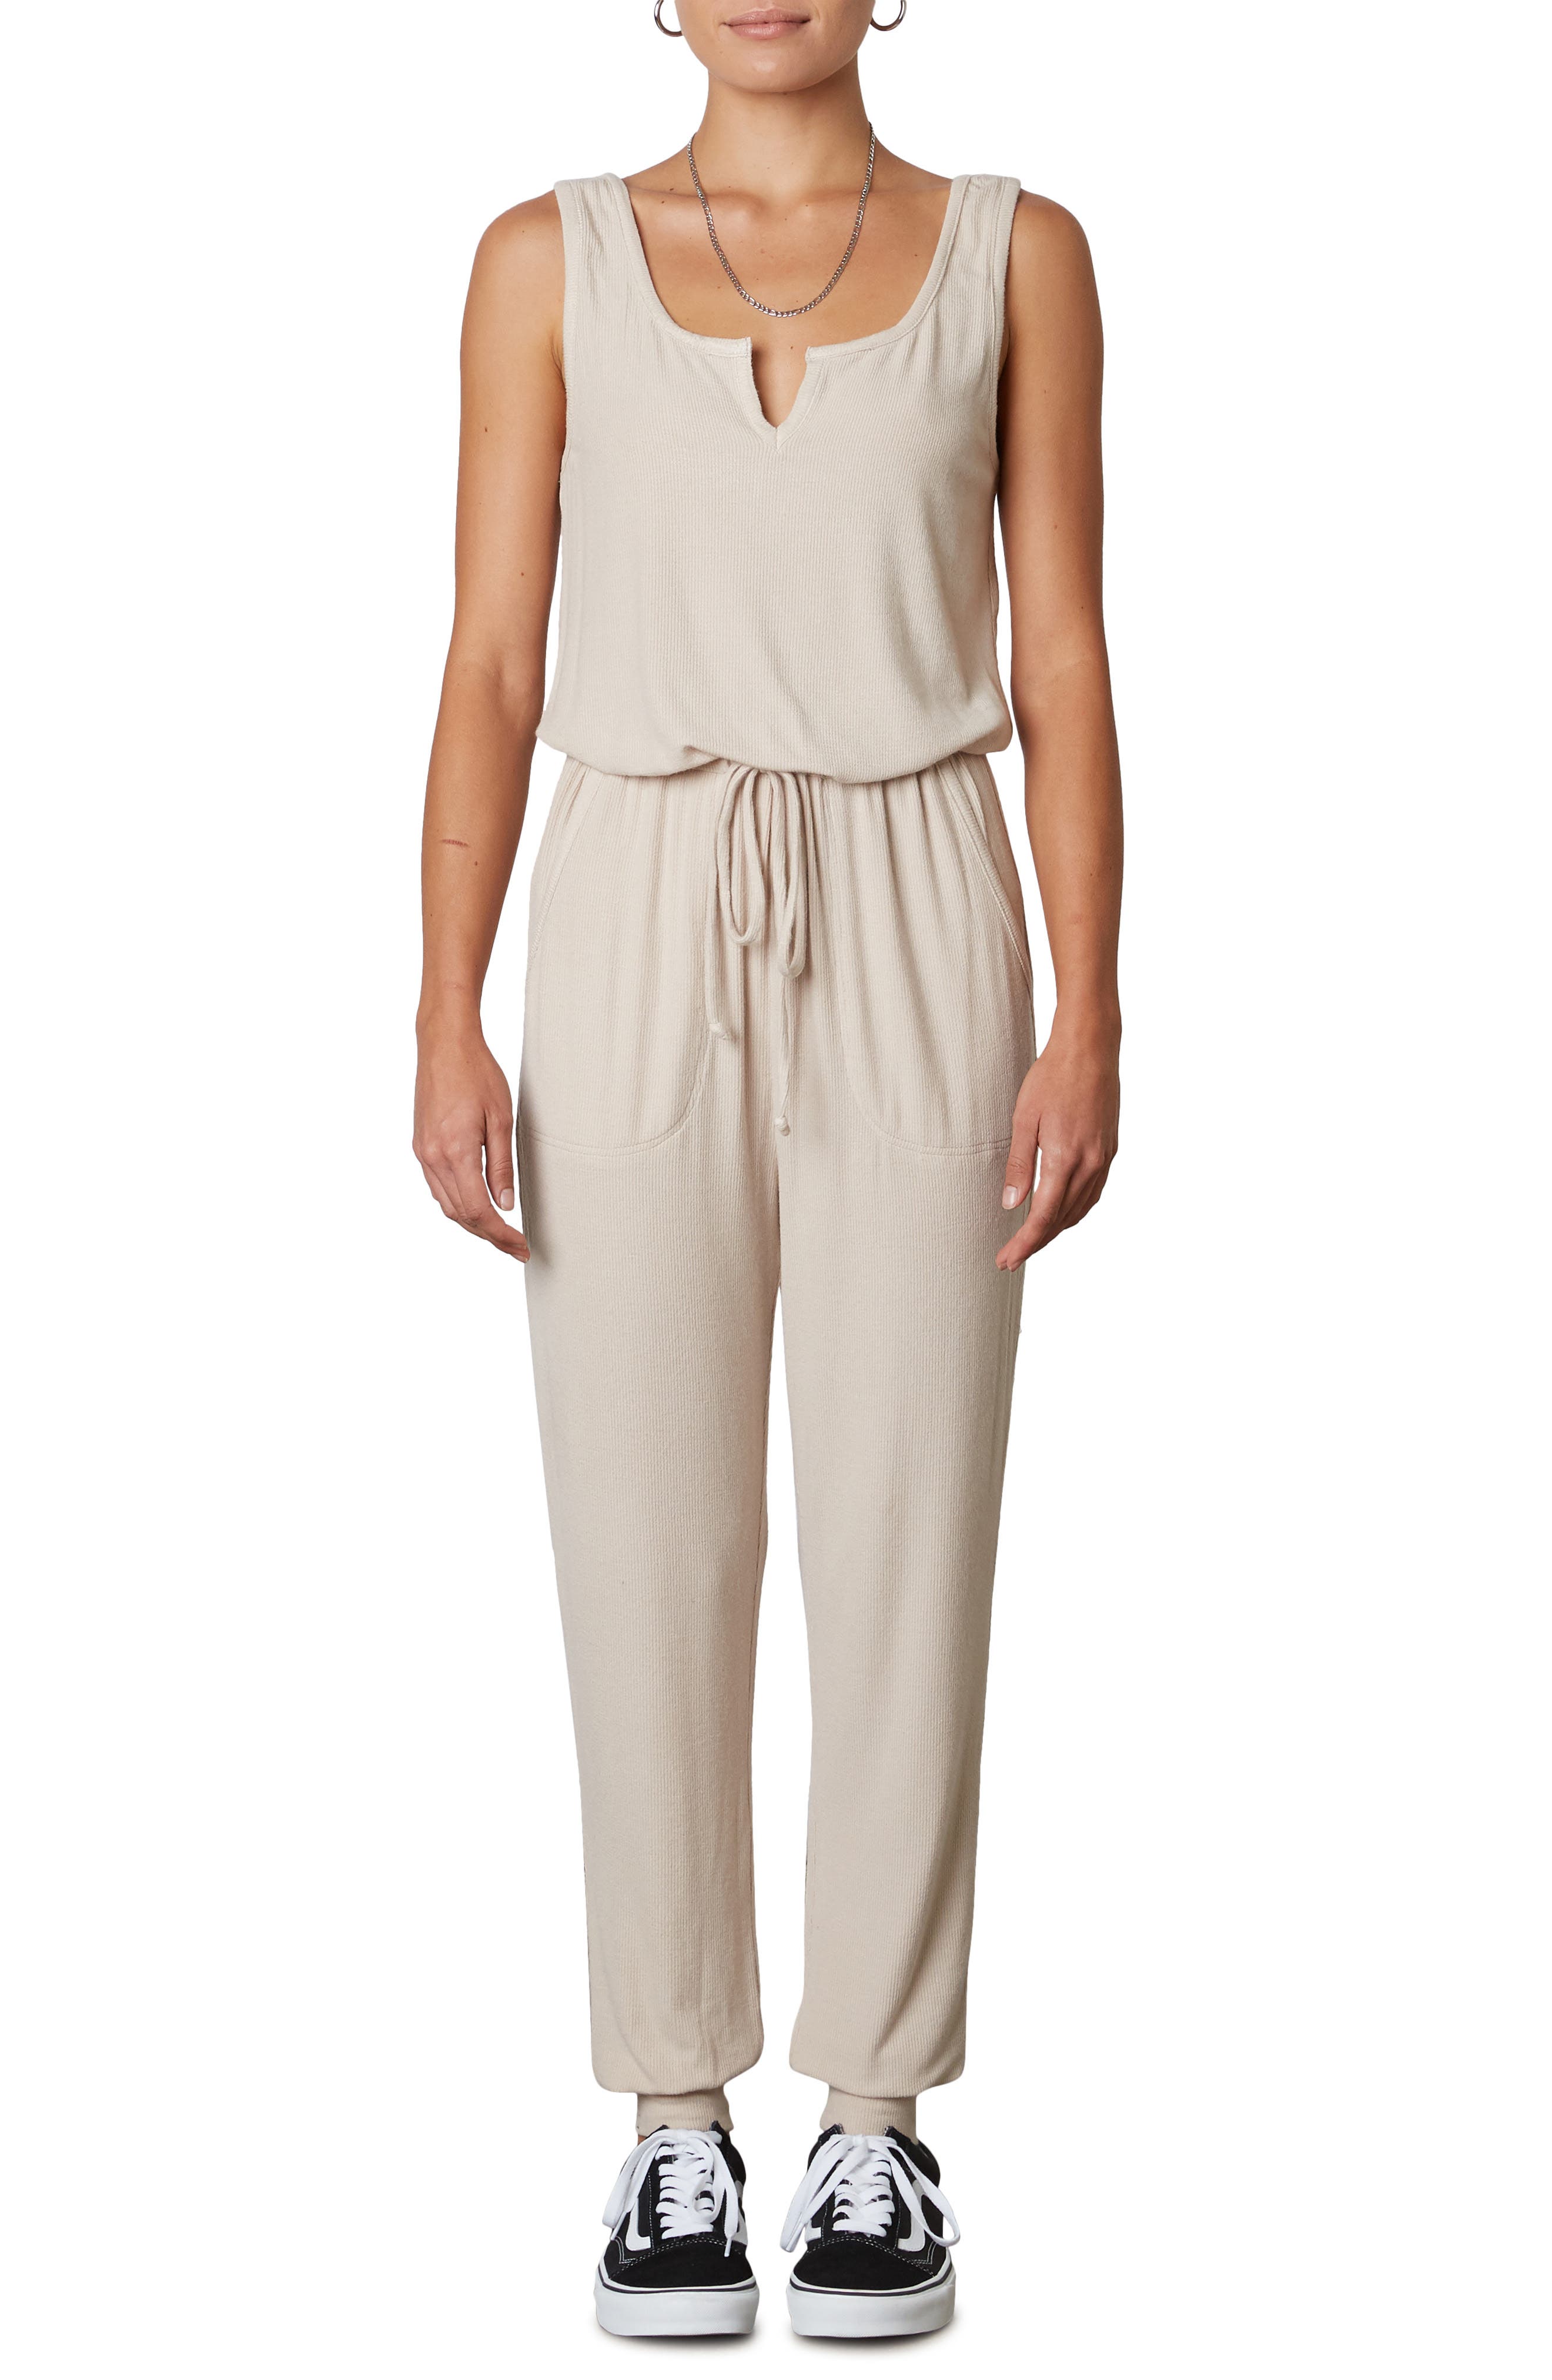 Nia Ribbed Hacci Jumpsuit, Size Small in Natural at Nordstrom